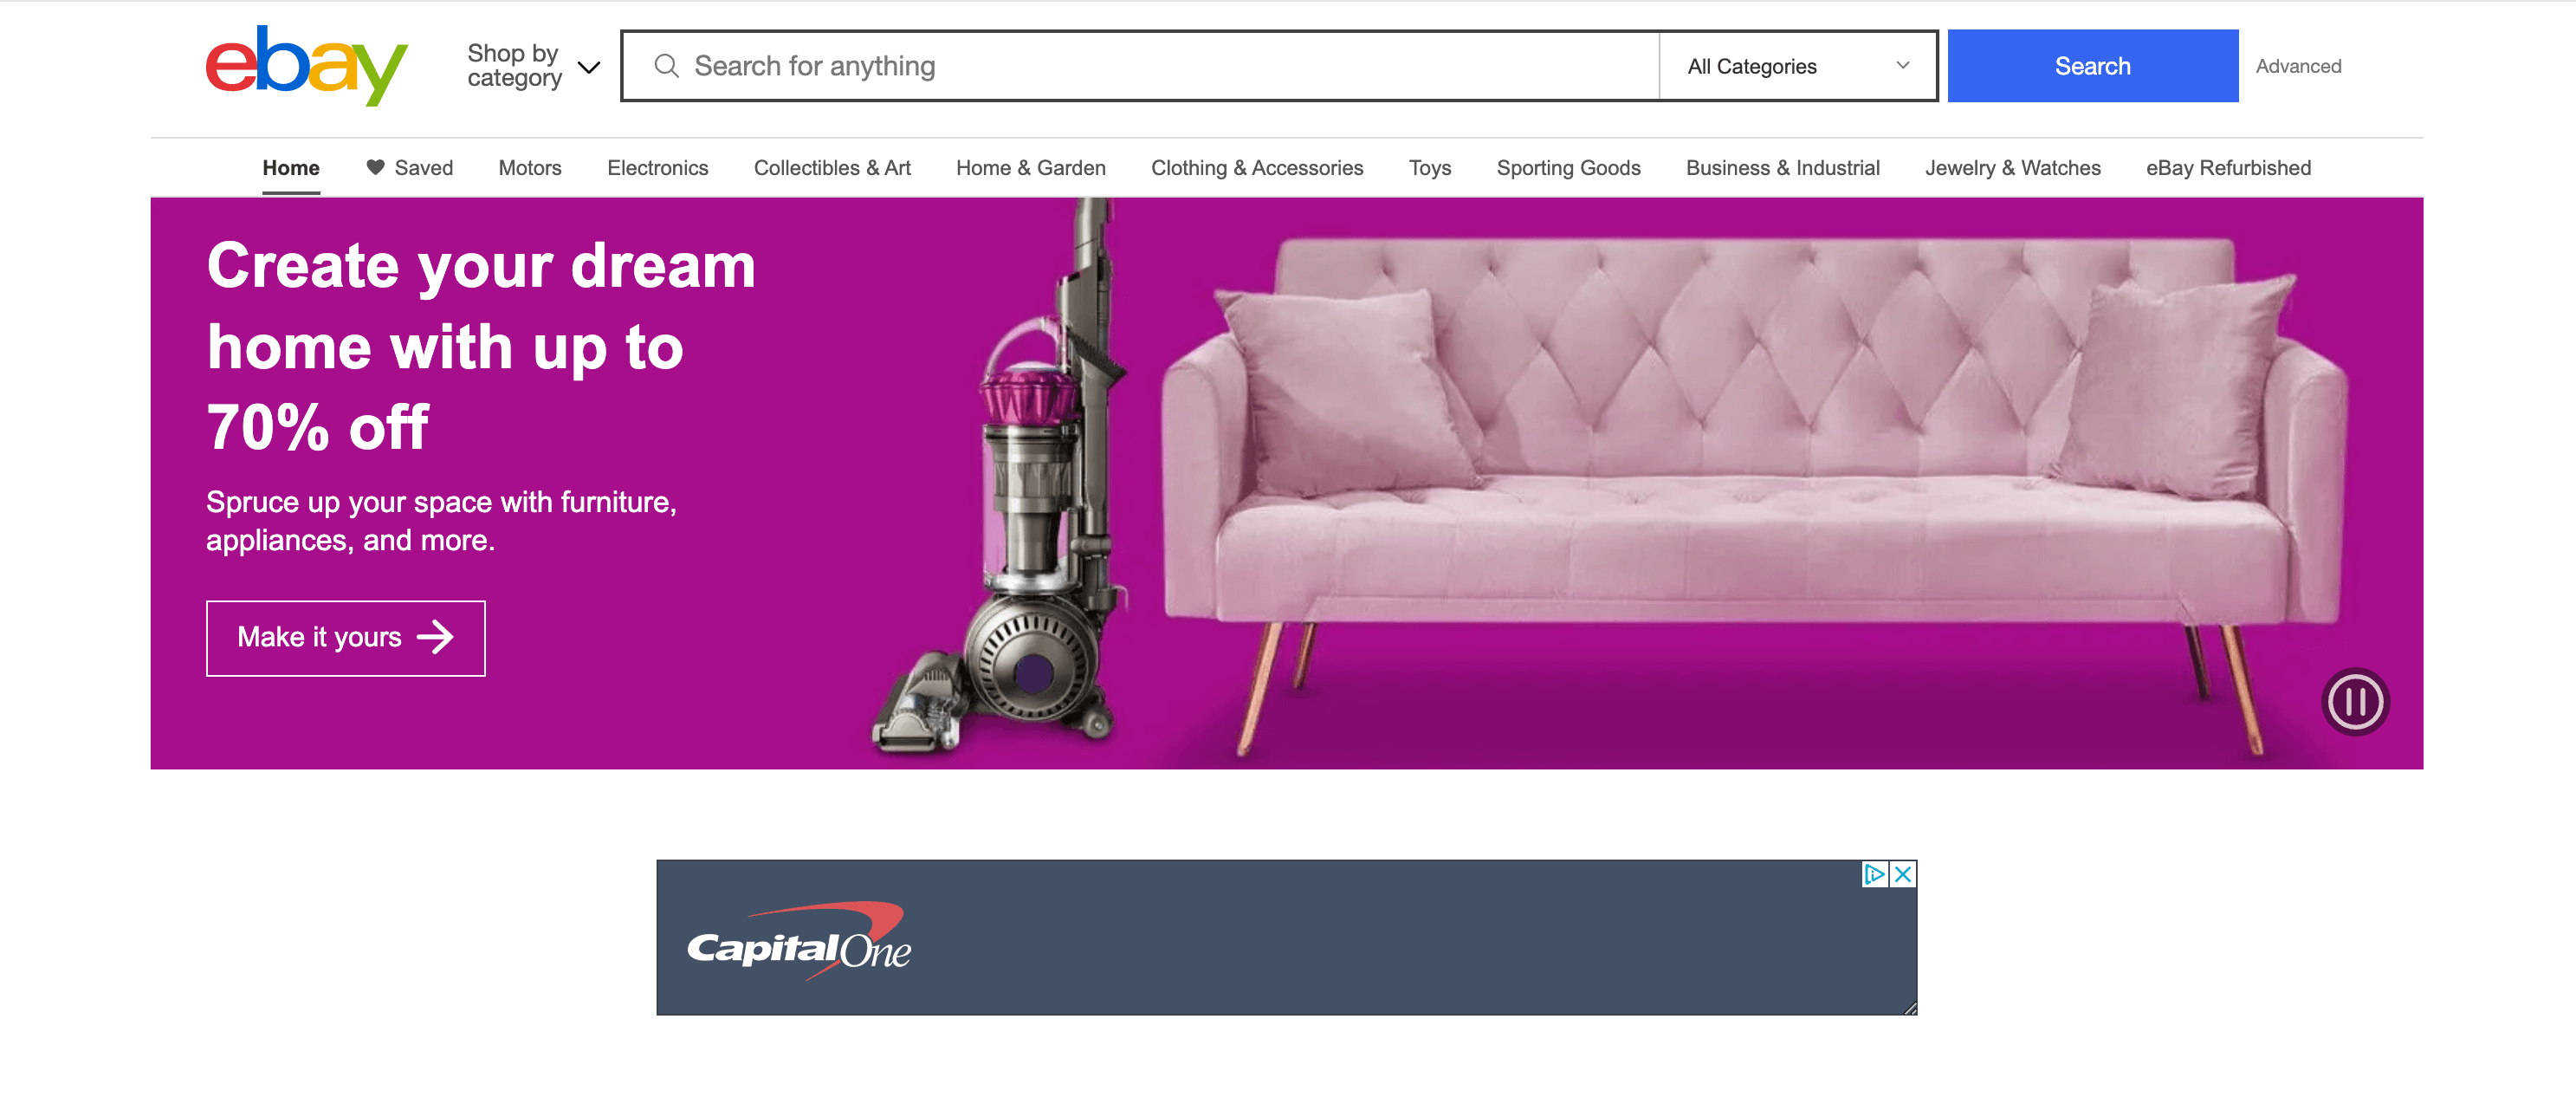 eBay's home page